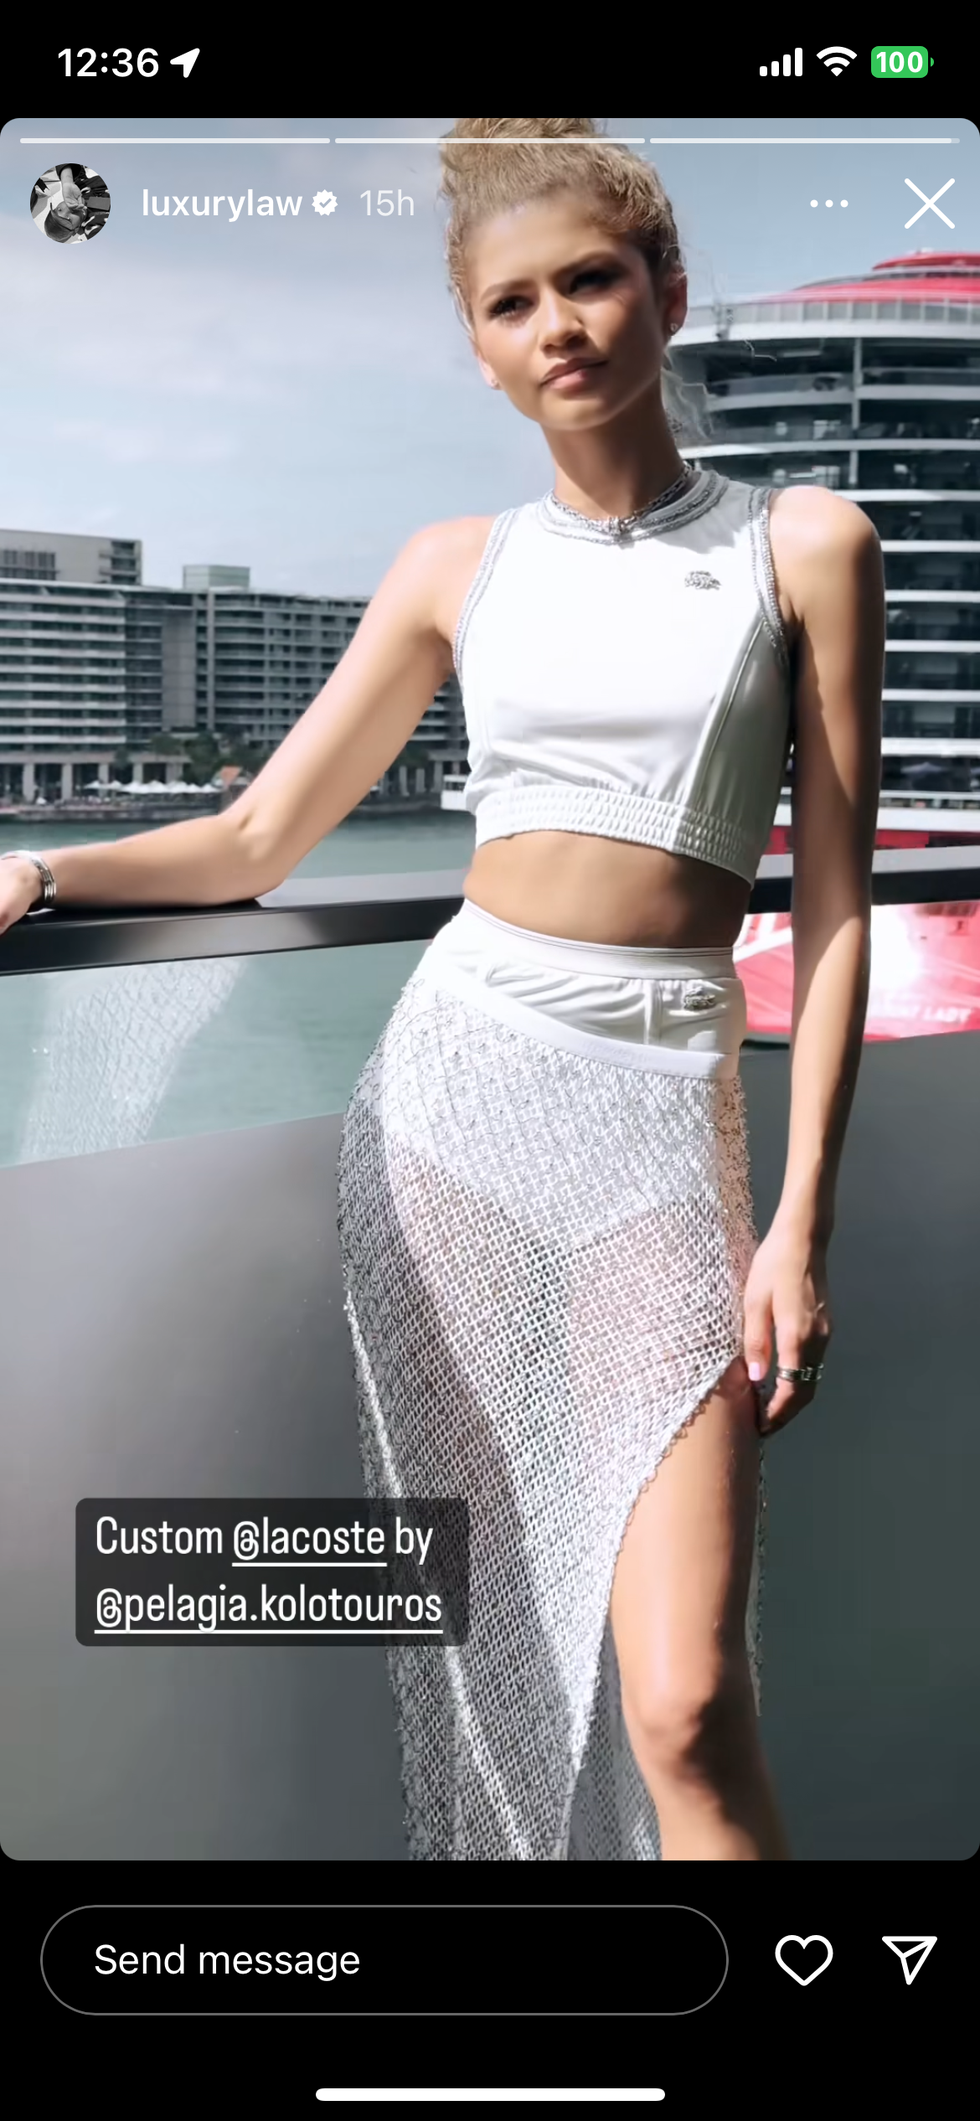 zendaya in her white tennis outfit